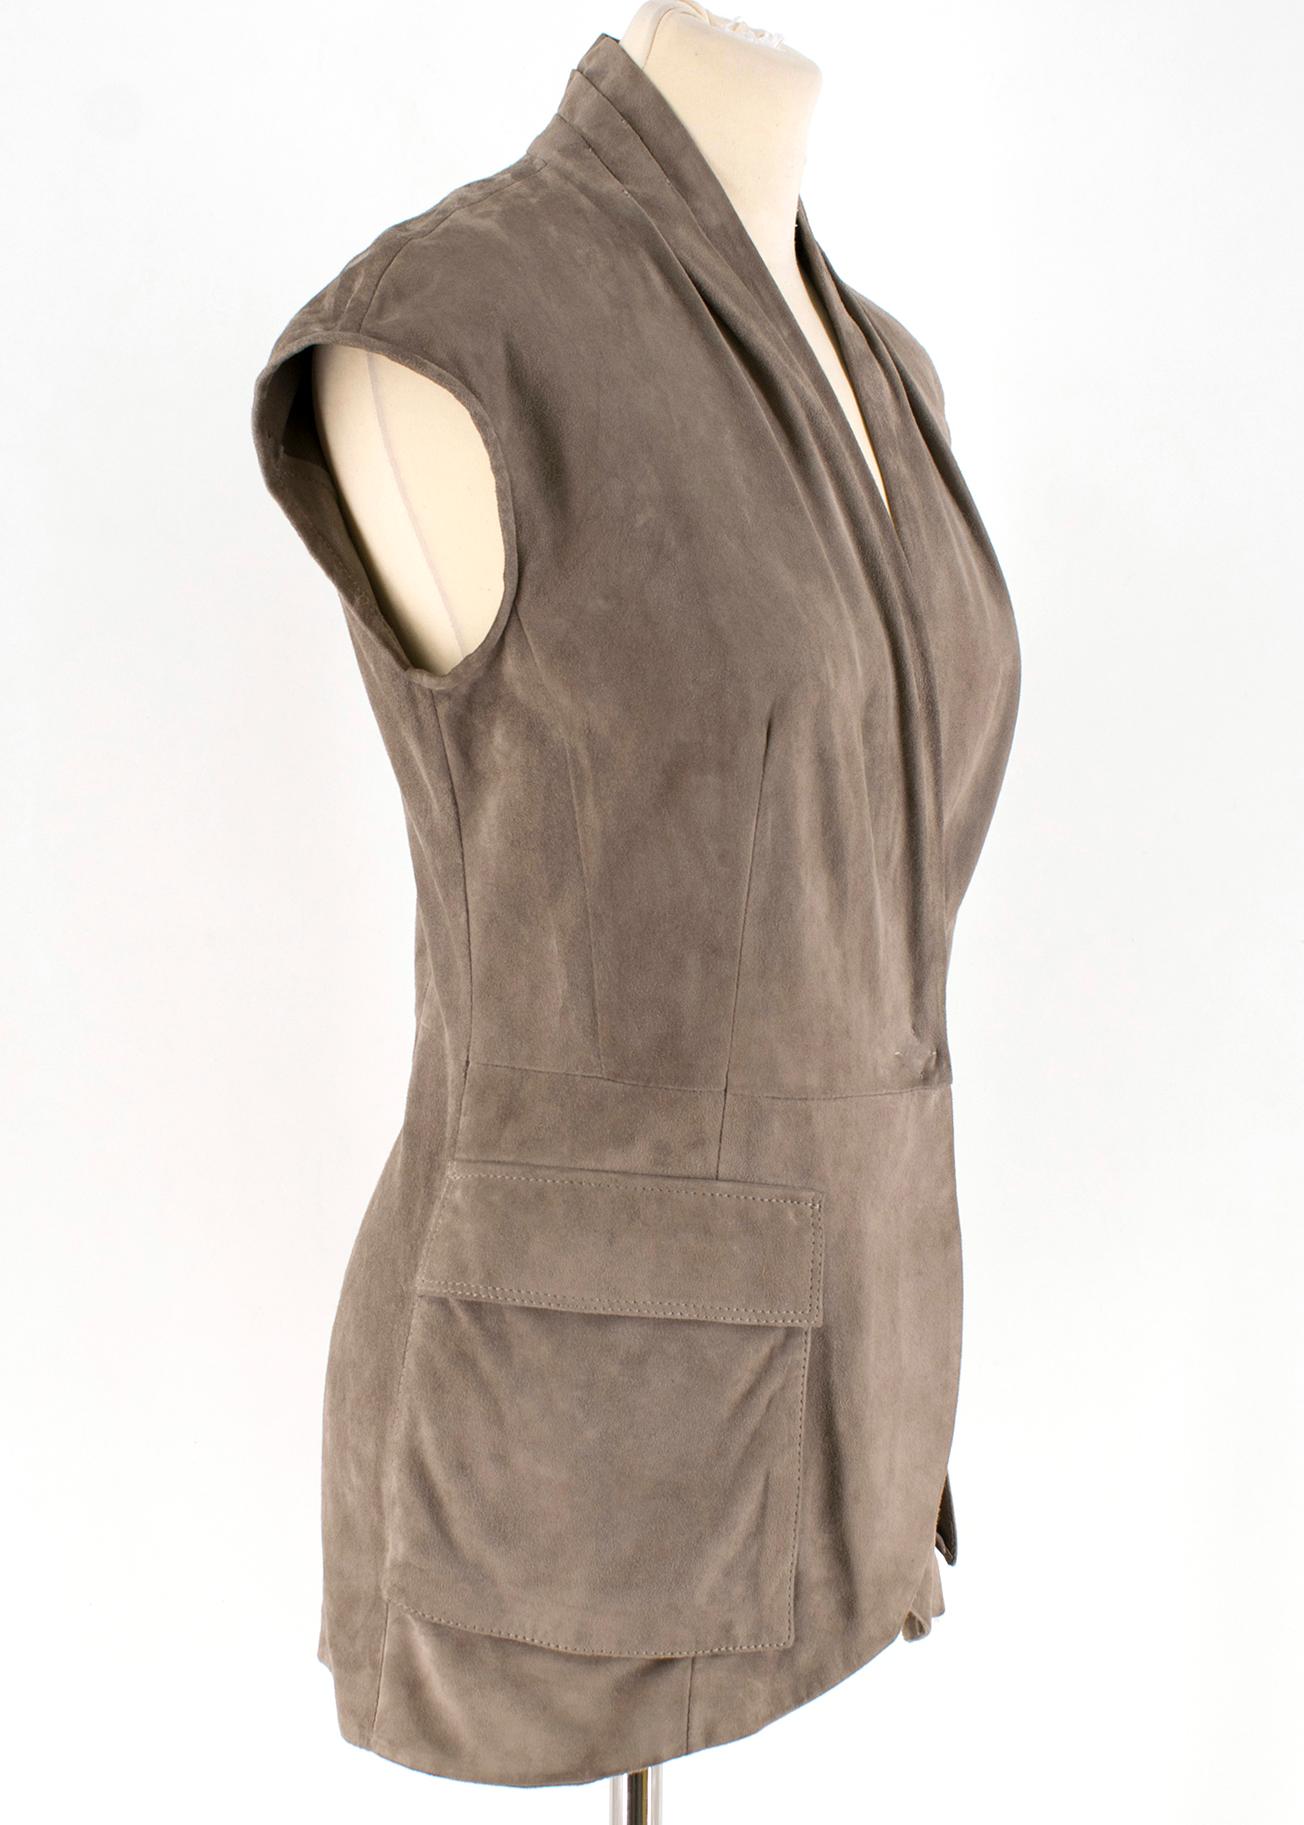 Brunello Cucinelli taupe suede sleeveless jacket

Soft suede leather gilet, 
Sleeveless with ruched collar design,
Two front flap pockets, 
Single snap button closure, 


Please note, these items are pre-owned and may show some signs of storage,